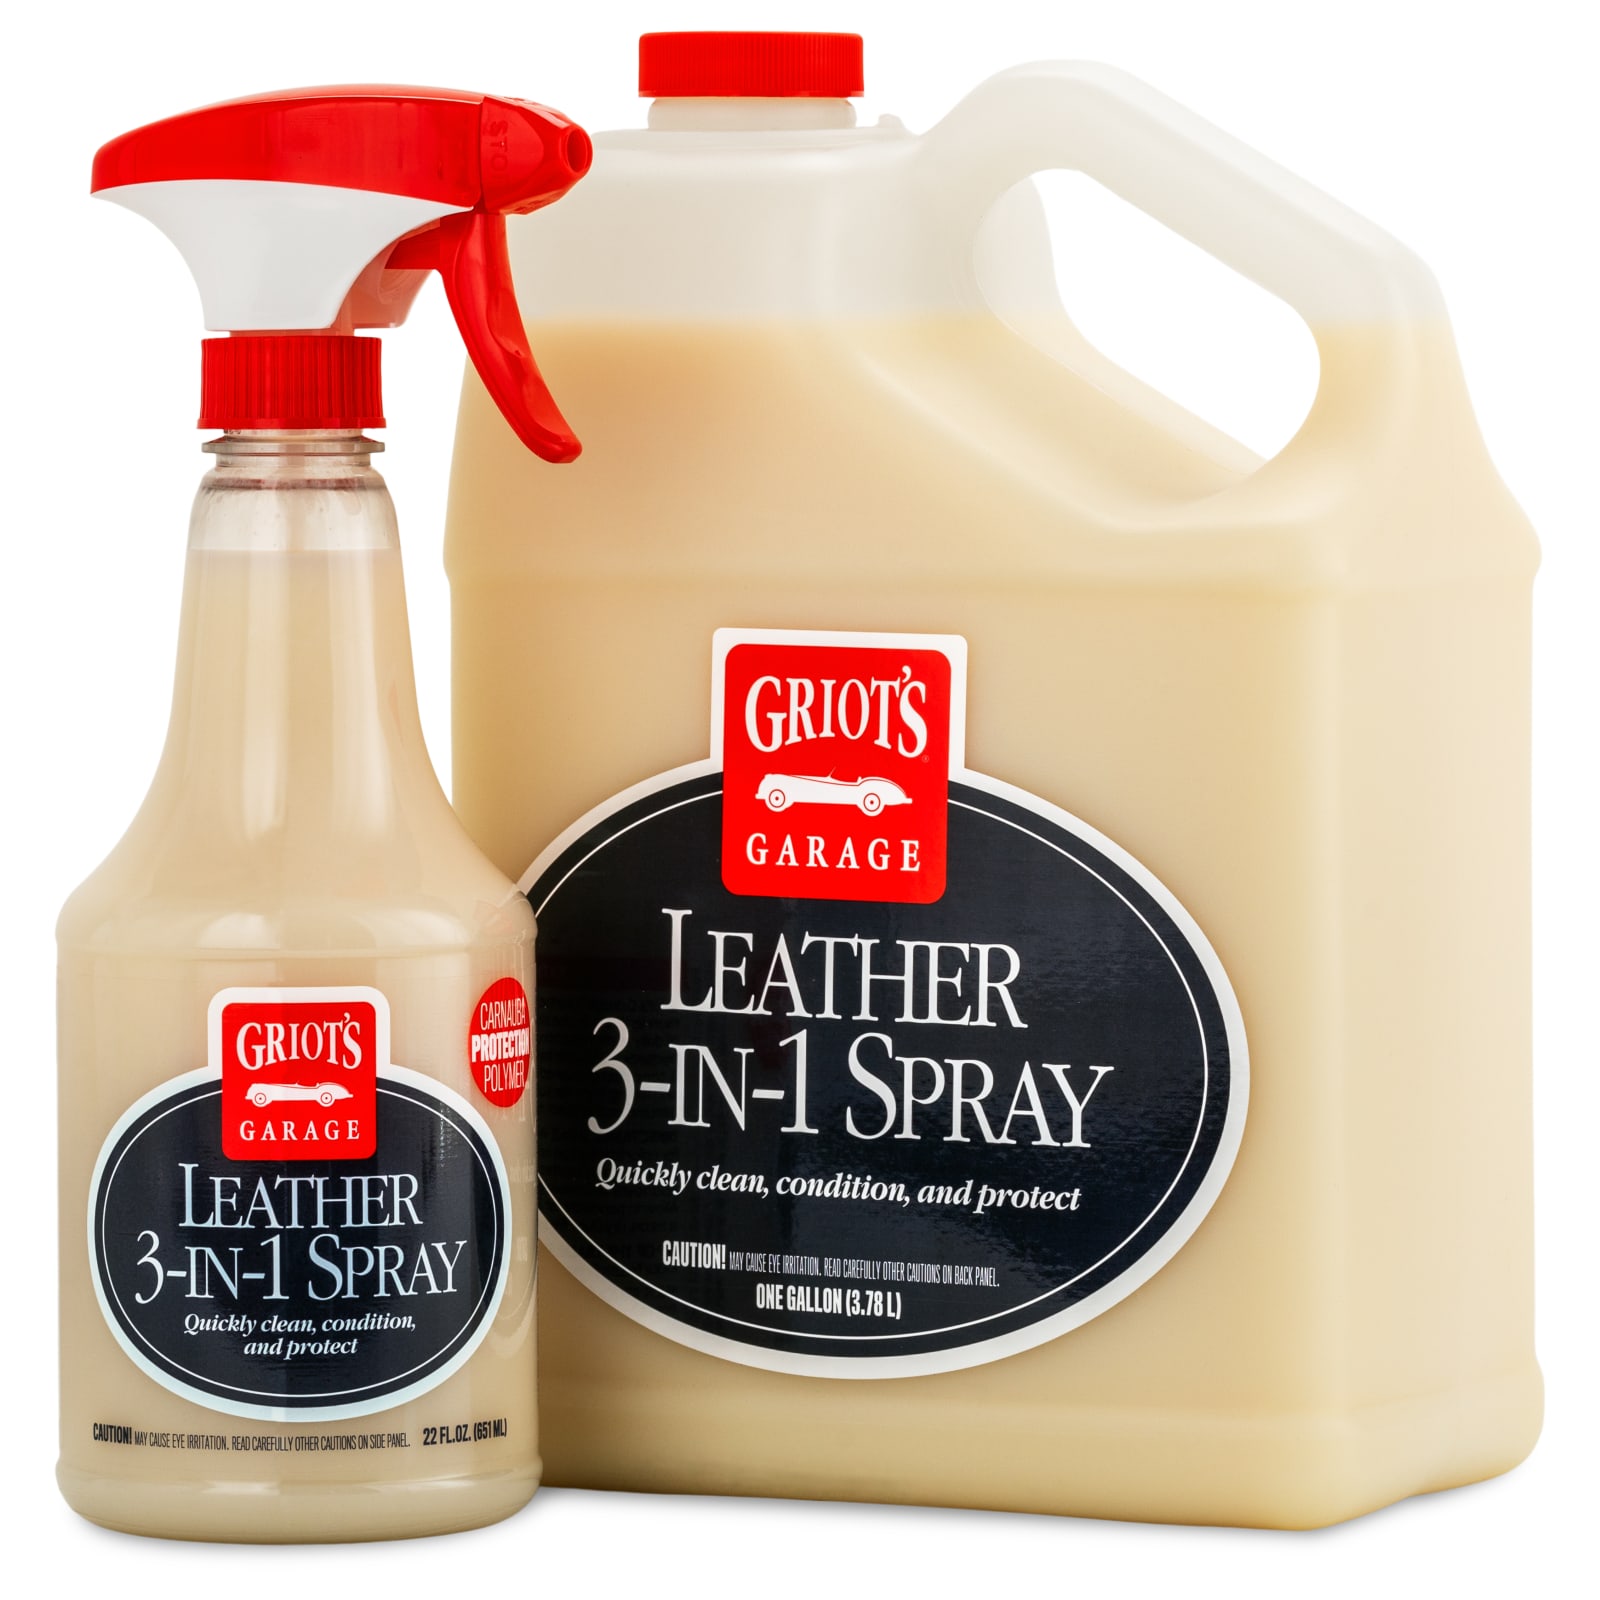 Leather 3-in-1 Spray - Protect, Preserve, Clean - Griot's Garage